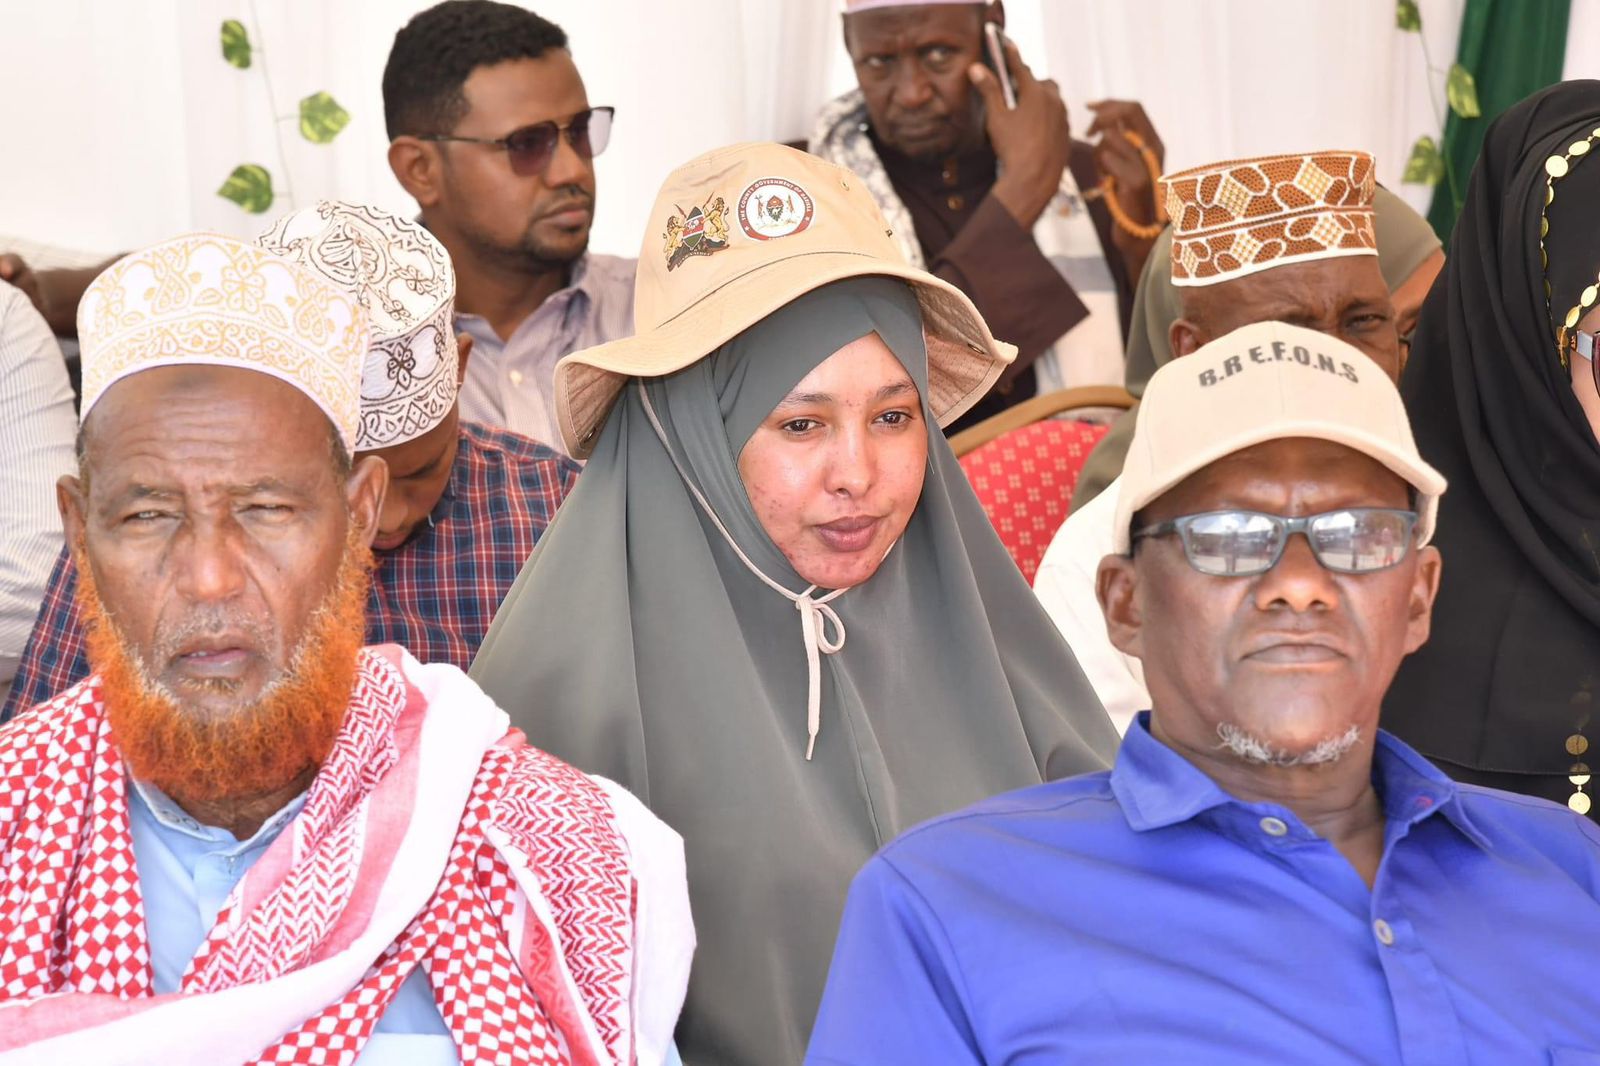 Garissa launches agro-pastoralist programme to improve lives, food security